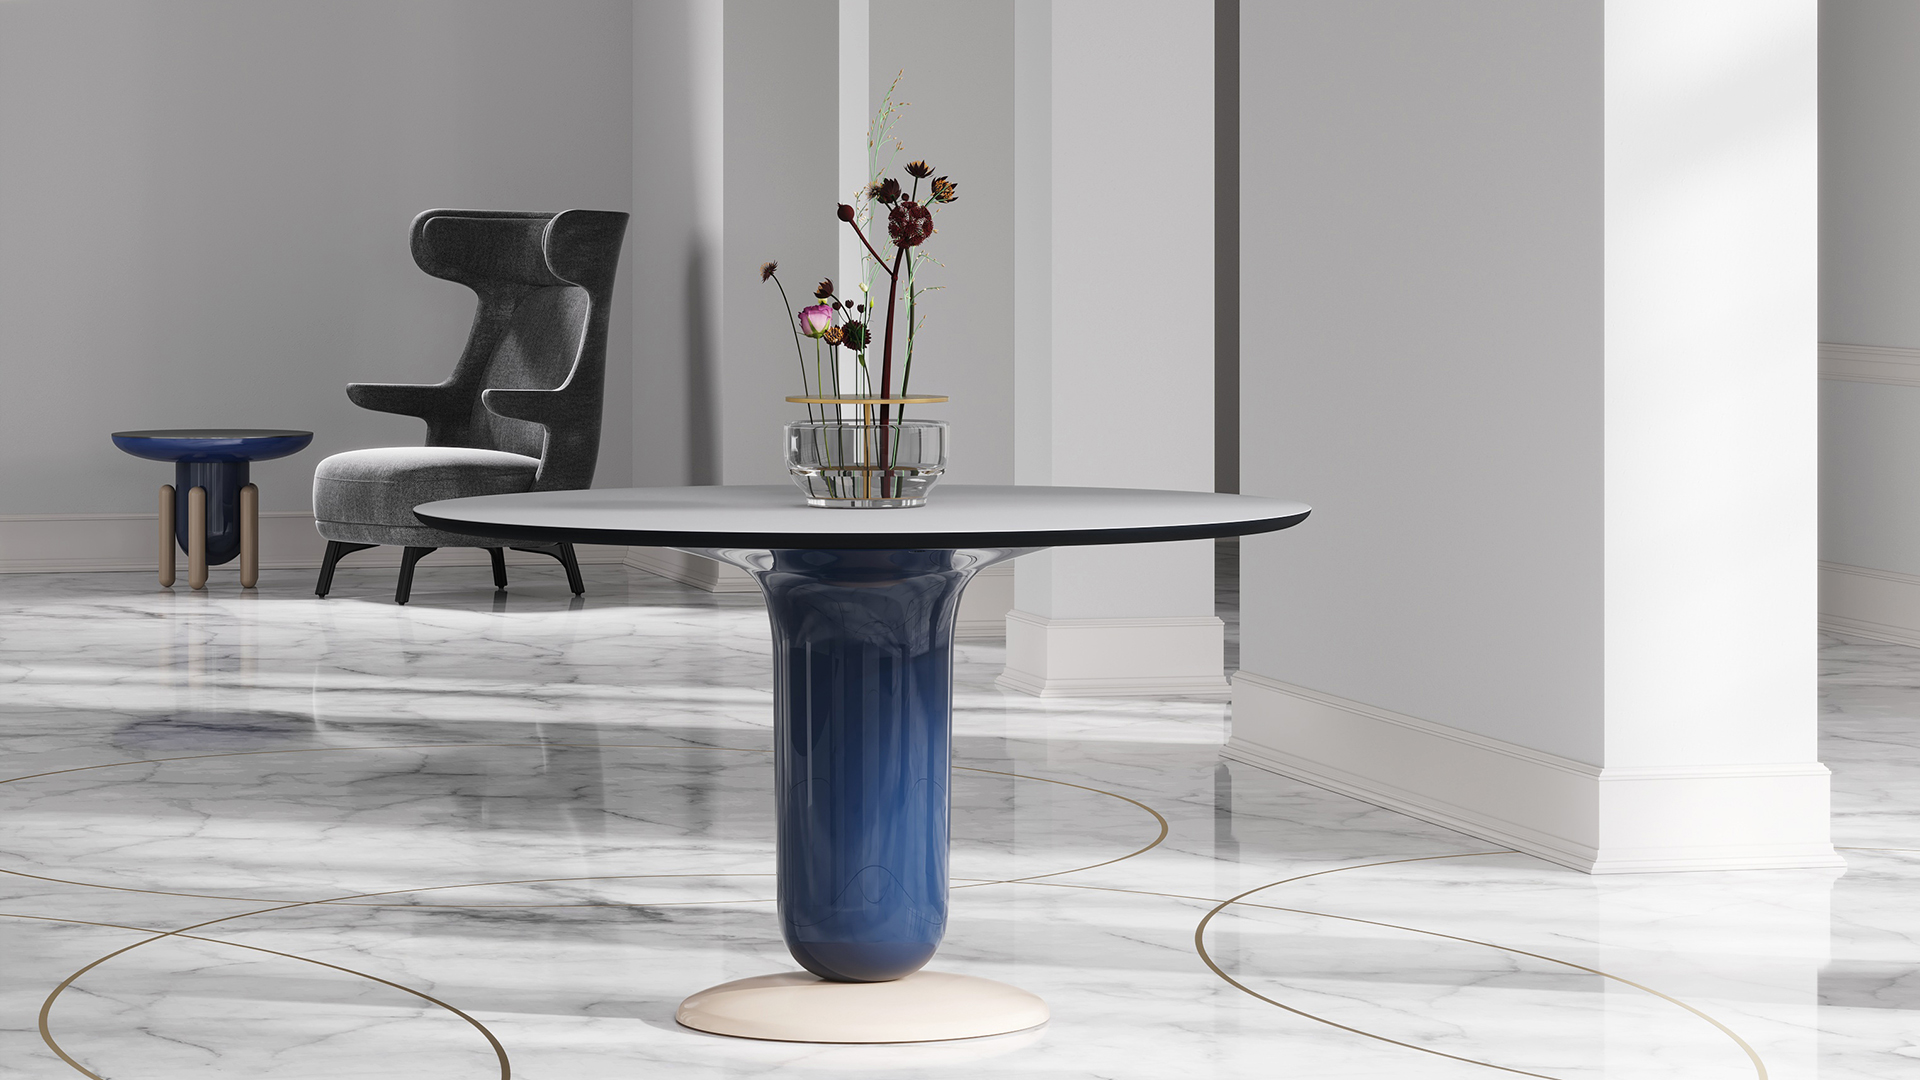 Explorer 4 Dining Table, Lifestyle